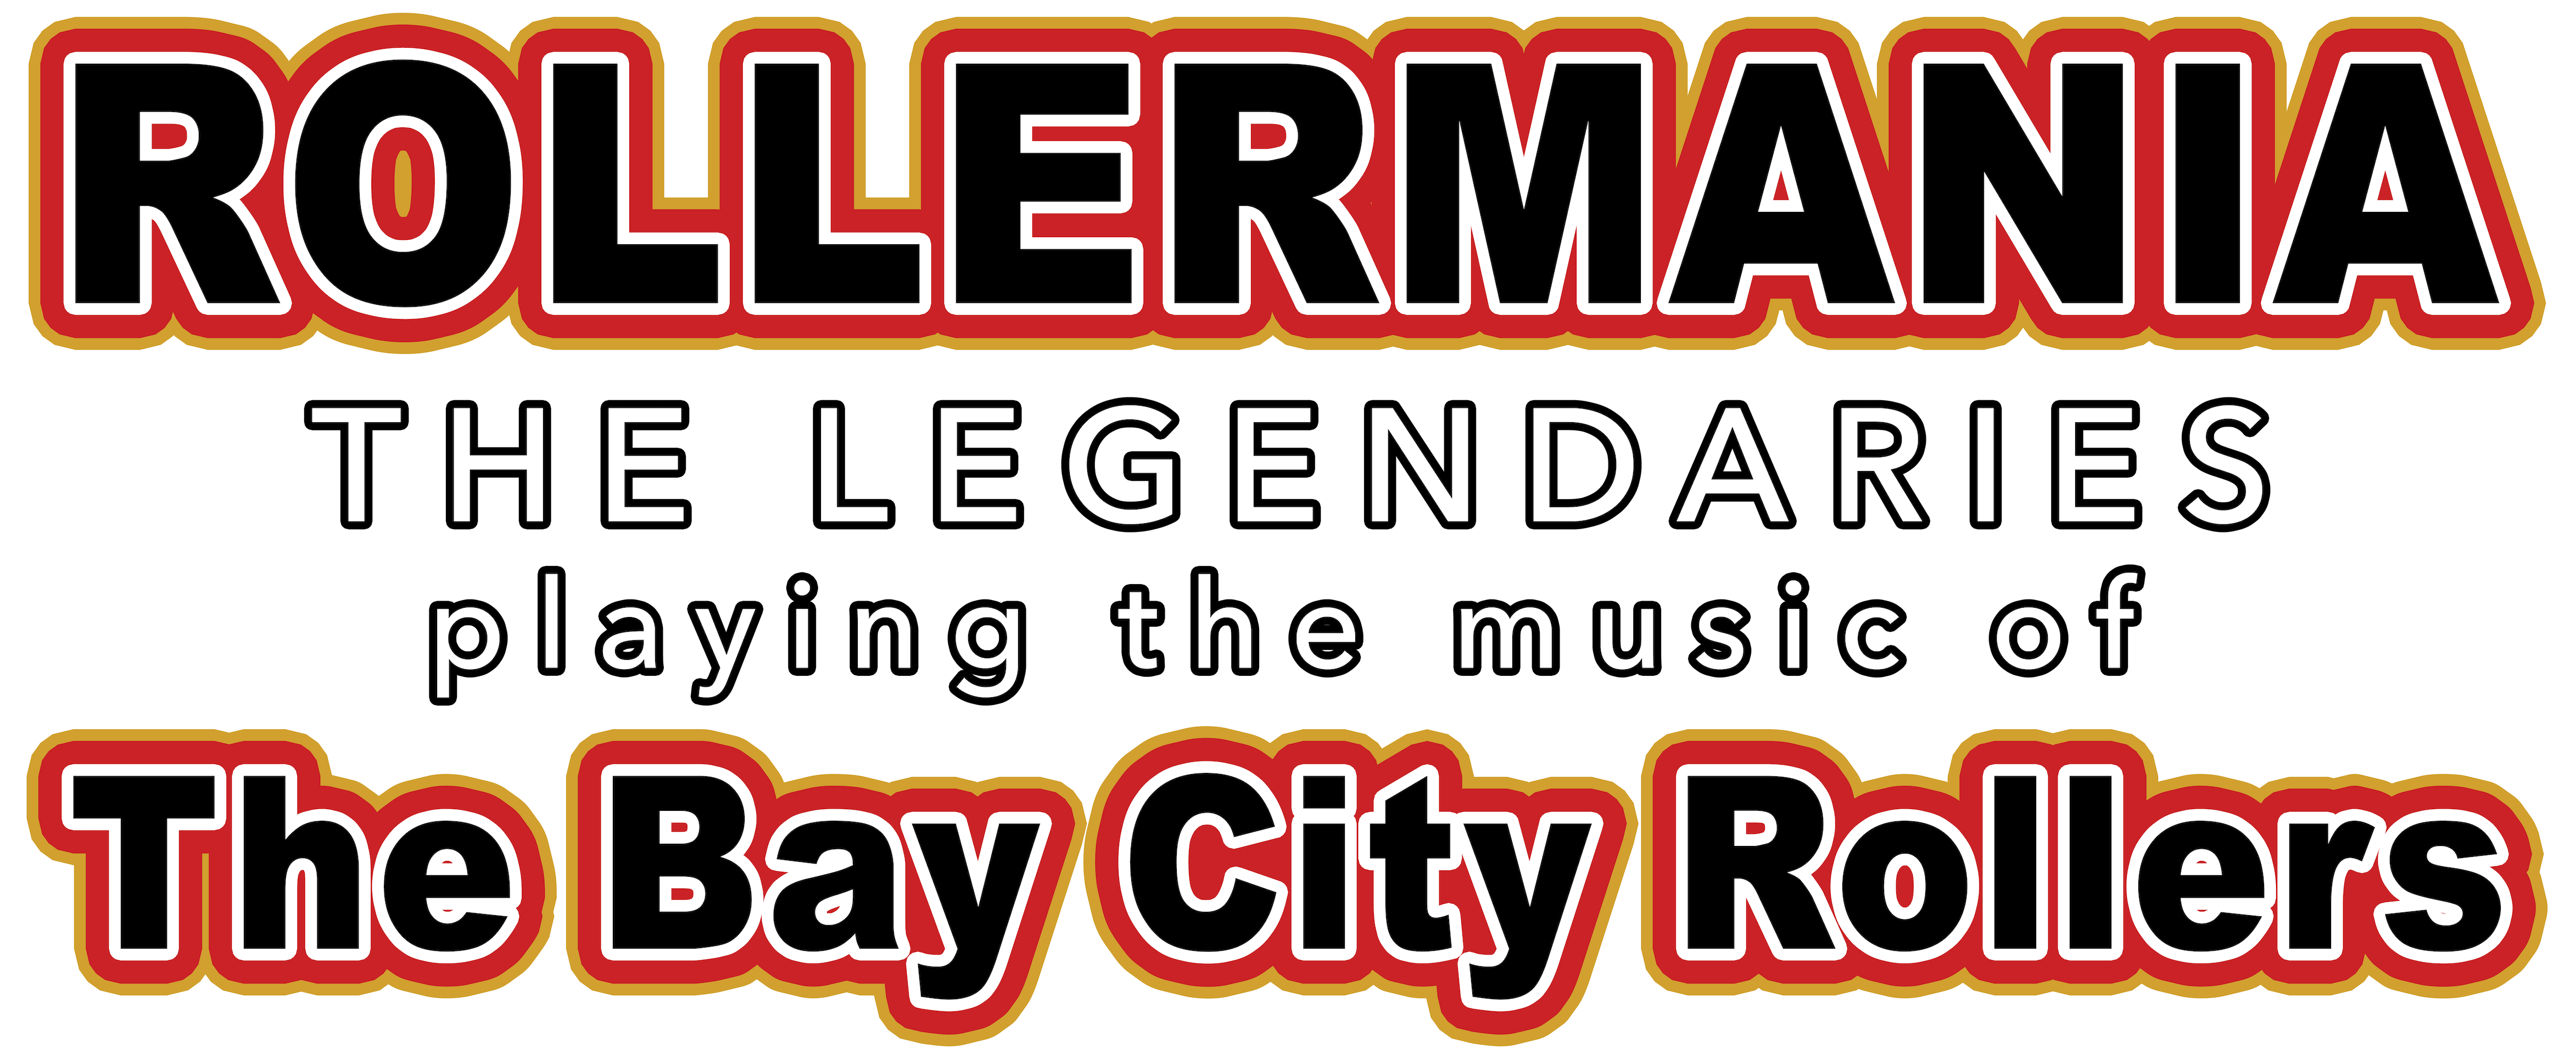 The Bay City Rollers music performed live by Rollermania - The Legendaries